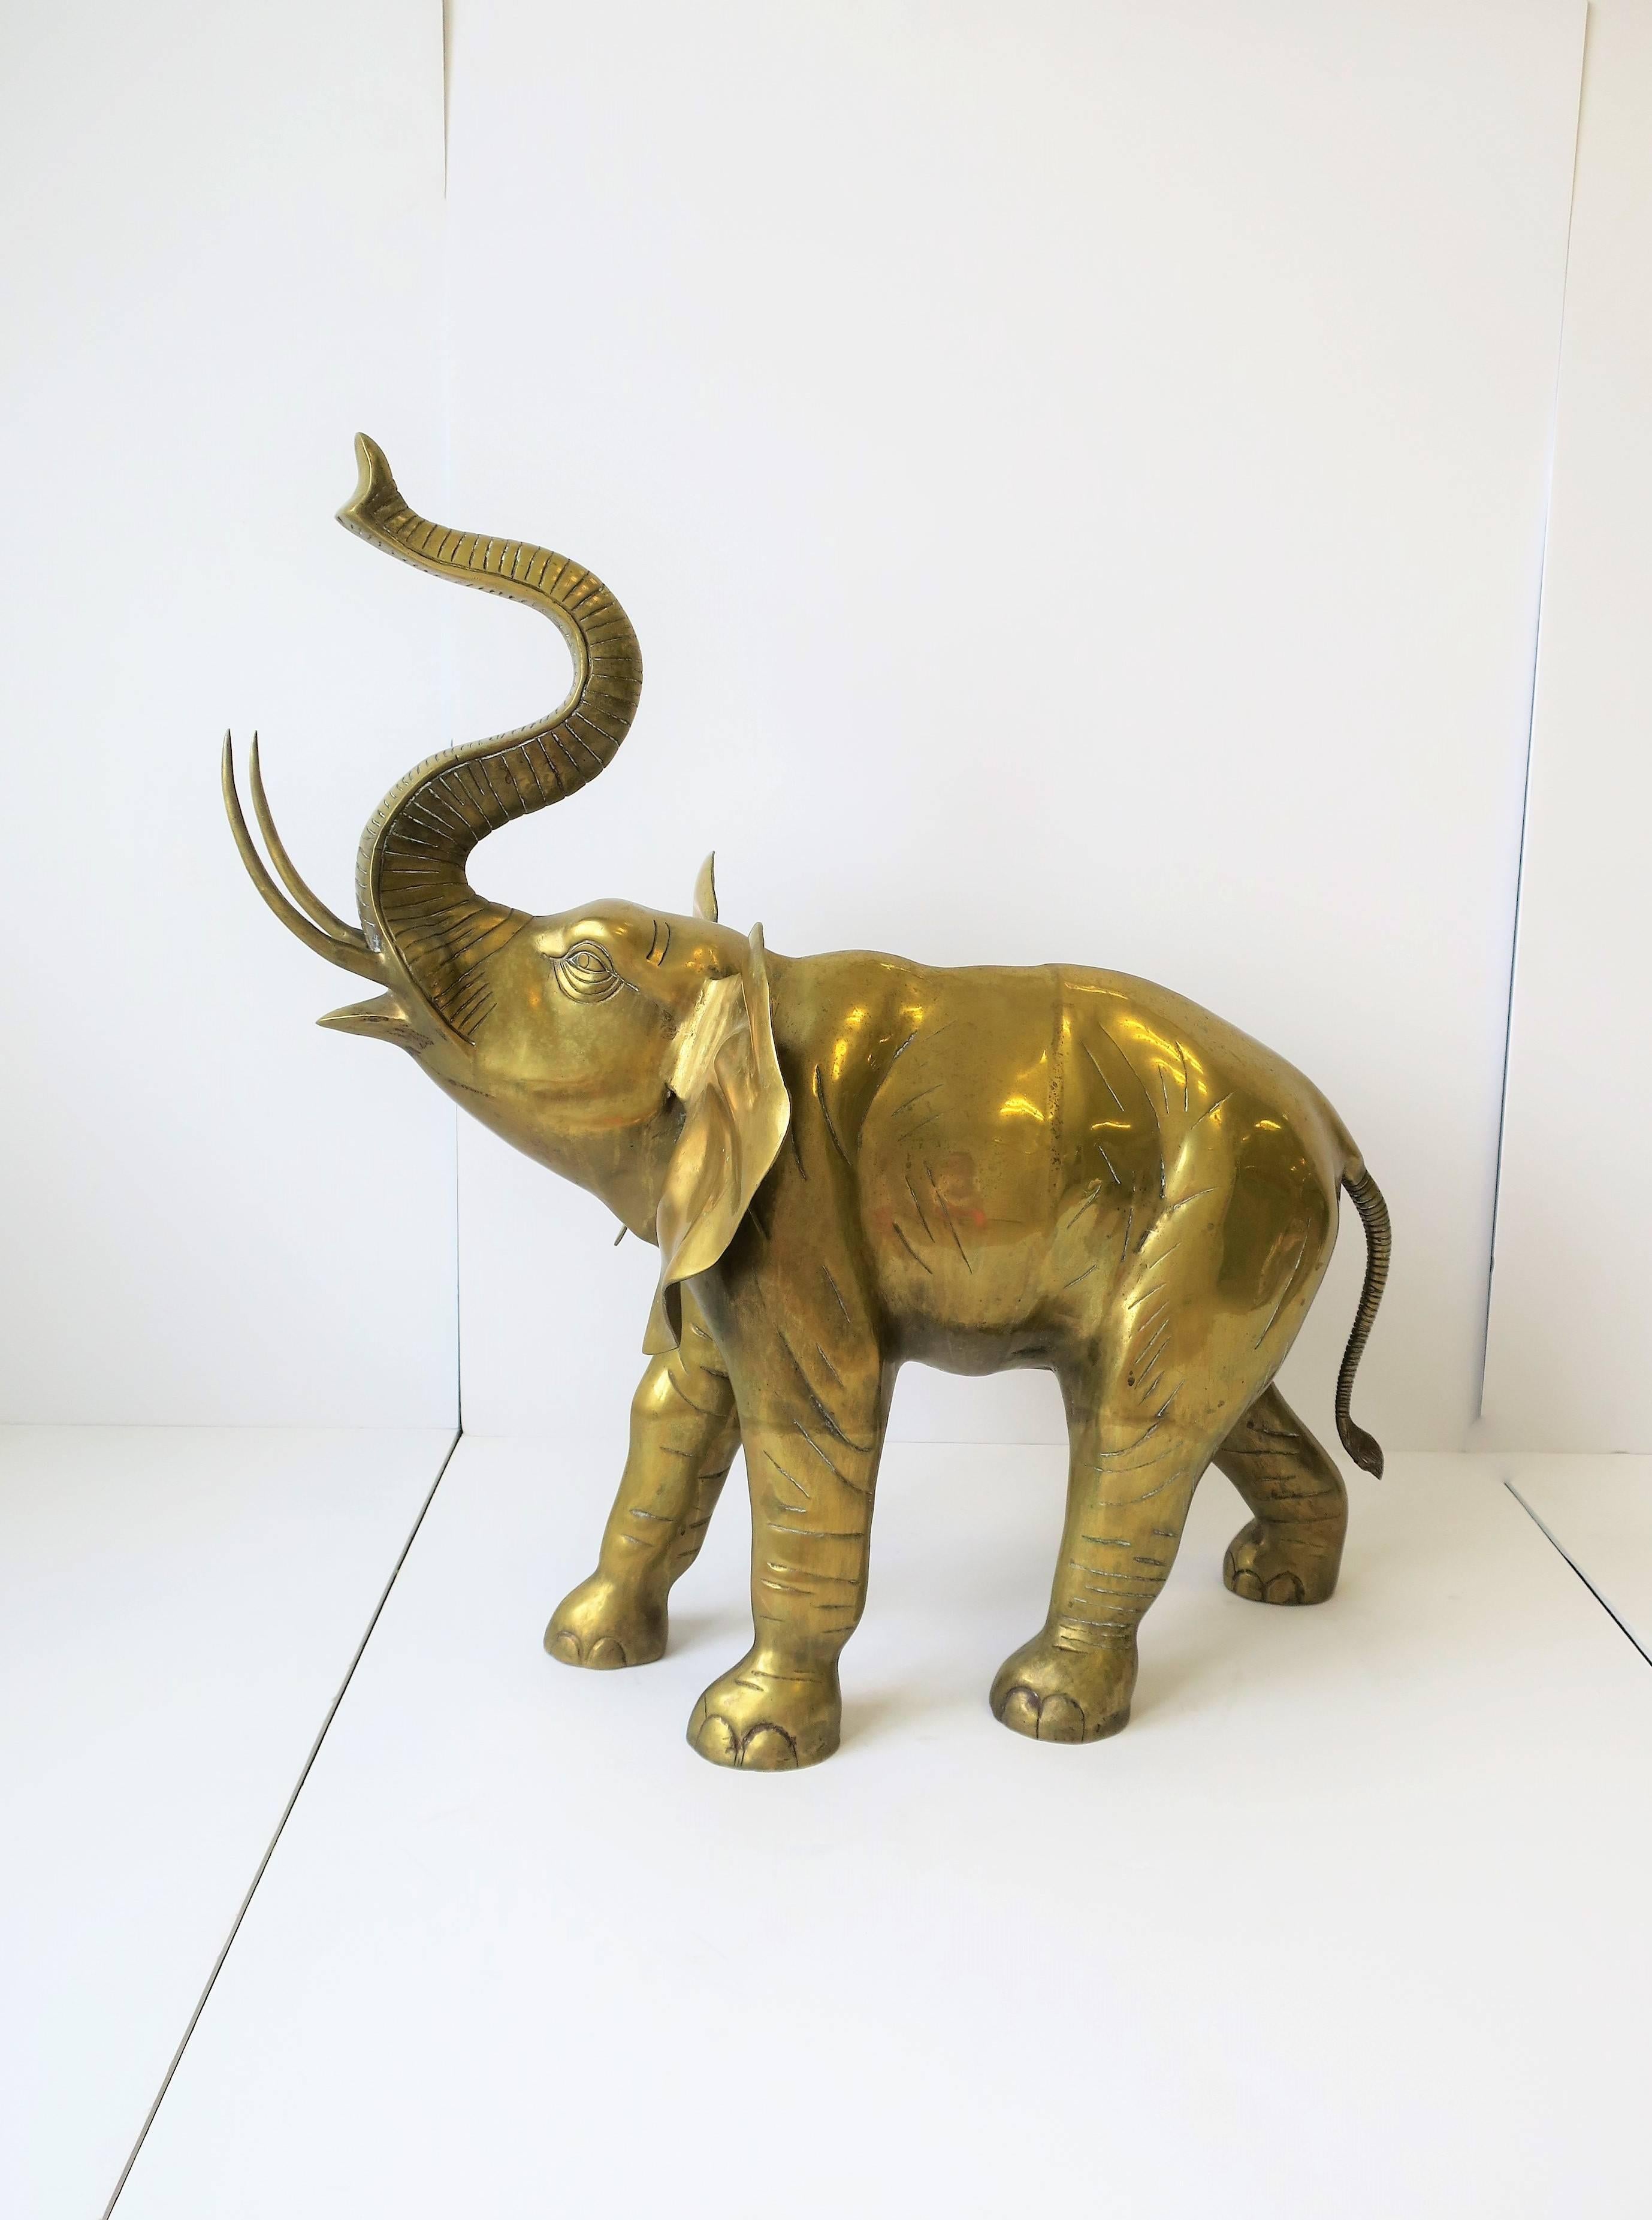 A substantial and relatively large brass elephant, circa 1970s, India. Image #12 (car key on R) and image #13 on top of coffee table, for scale. Beautiful details from trunk to tail. 

Elephant measures: 16.75